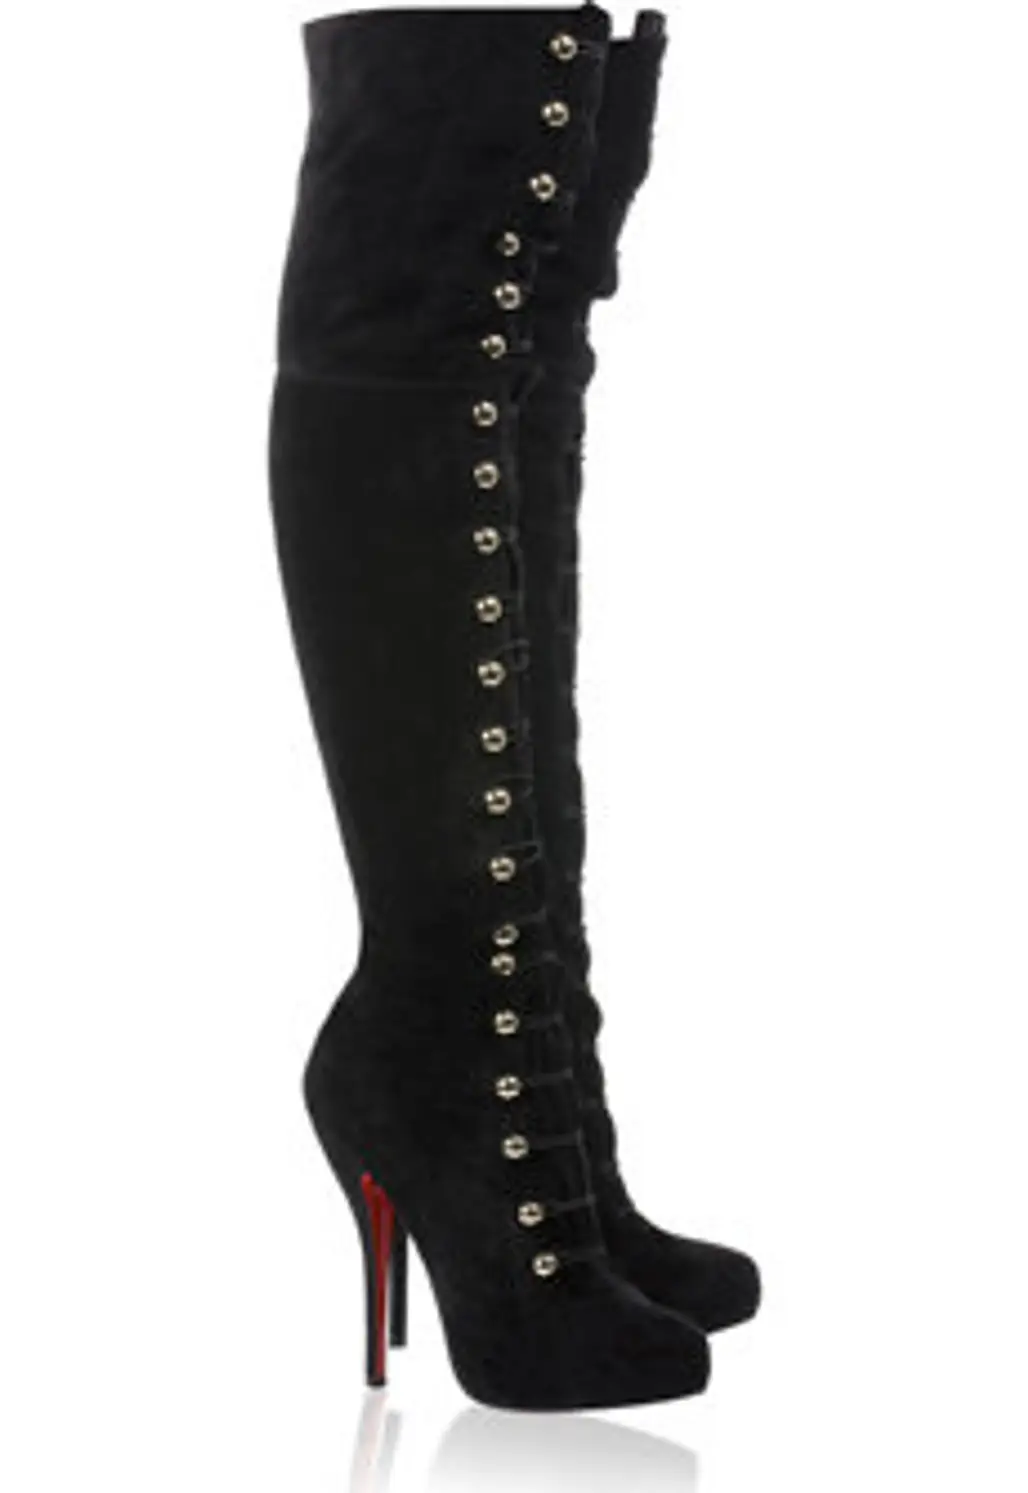 Christian Louboutin Supra Fifre 120 Thigh High Boots